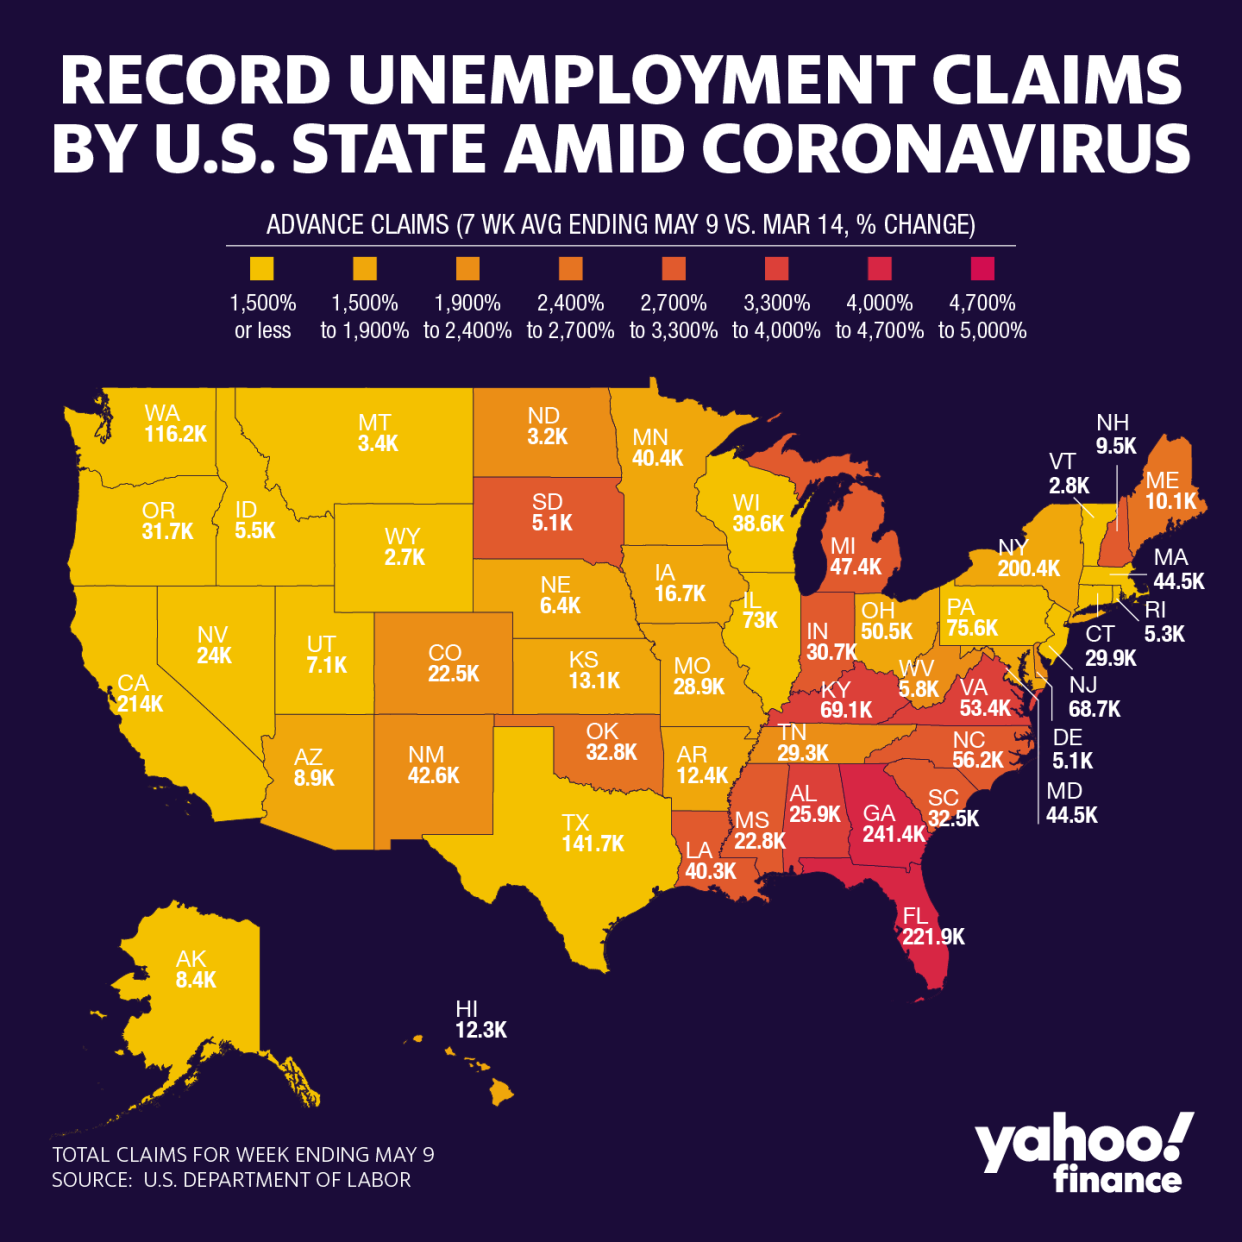 Record unemployment claims by U.S. state amid coronavirus